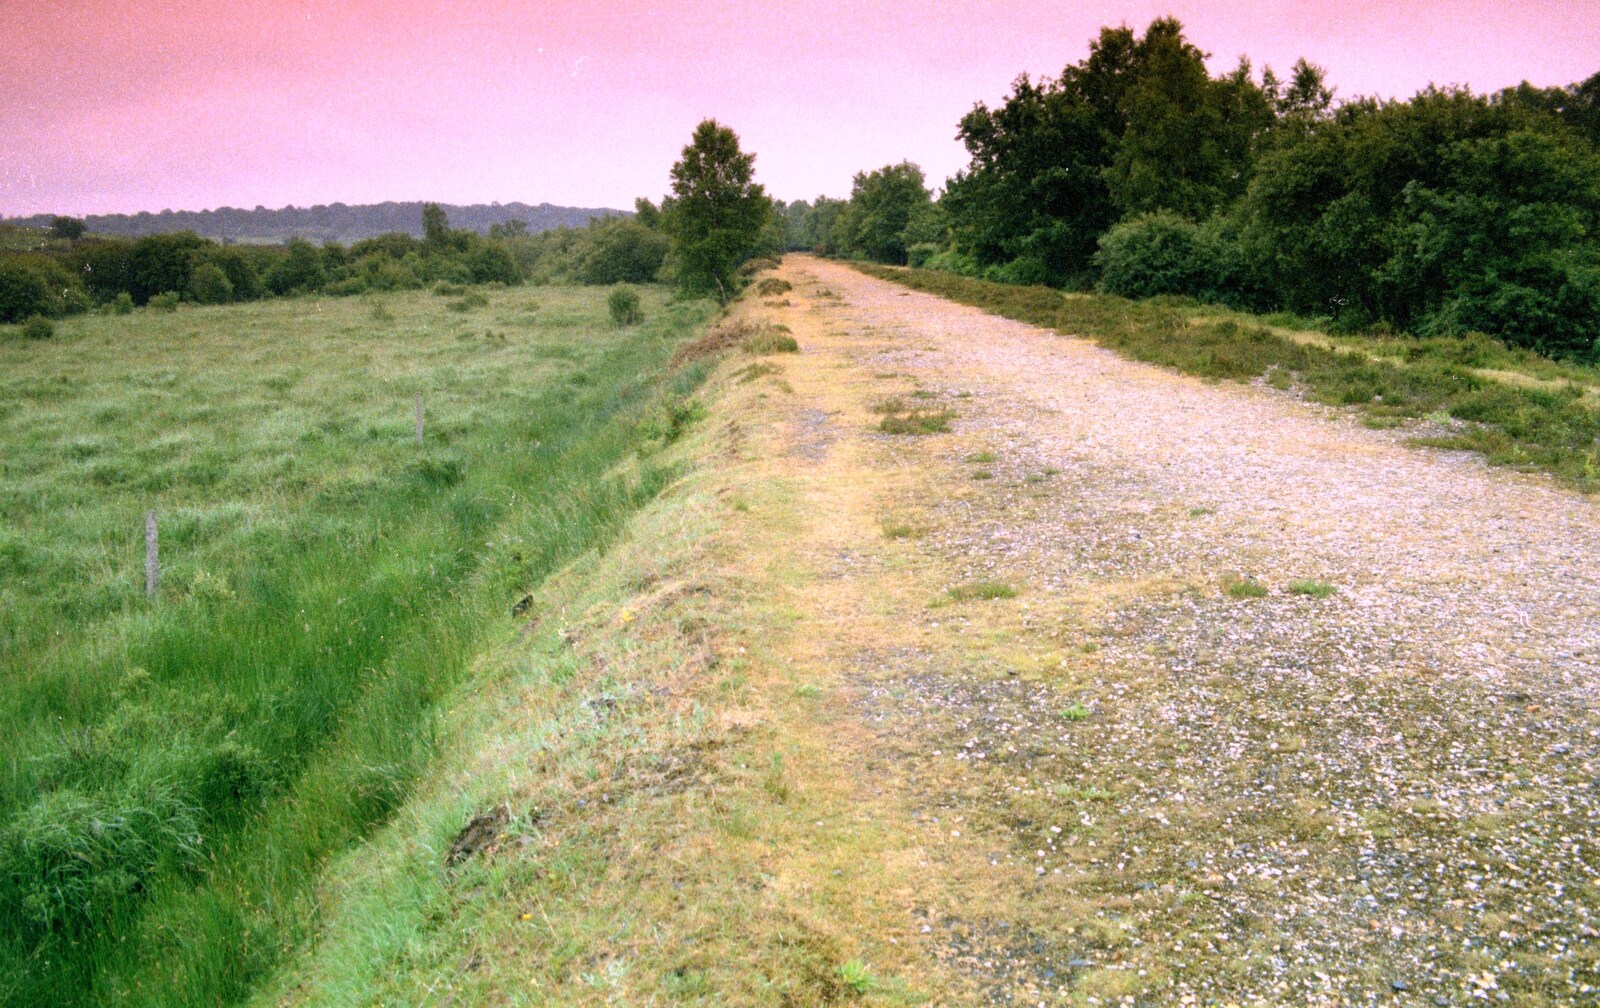 A disused railway track bed from A CB Wedding and a Derelict Railway, Hampshire - 20th July 1986